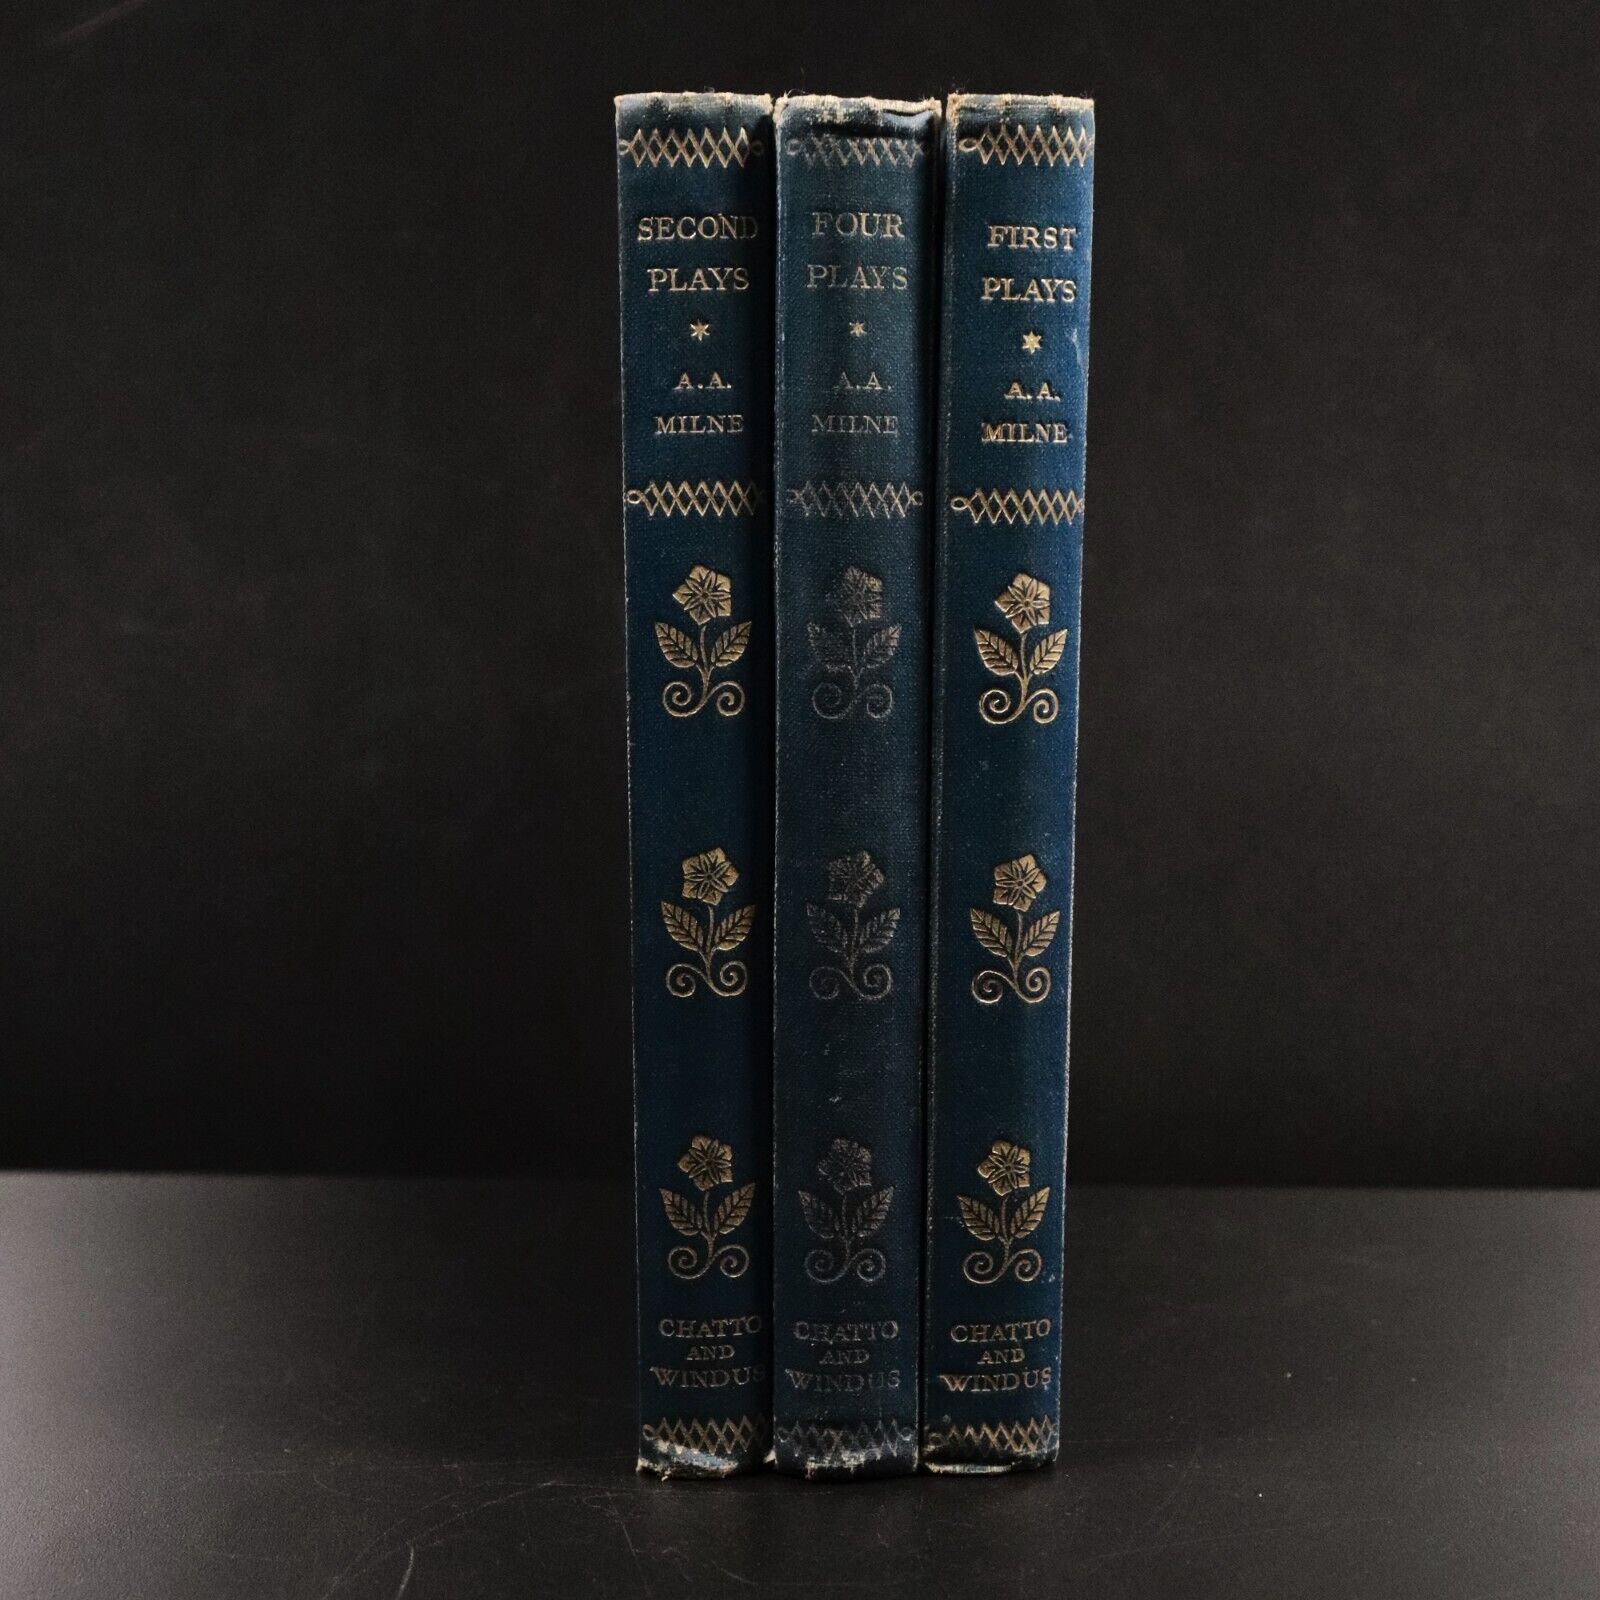 1928 3vol First, Second & Four Plays by A. A. Milne Stage Play Books Phoenix